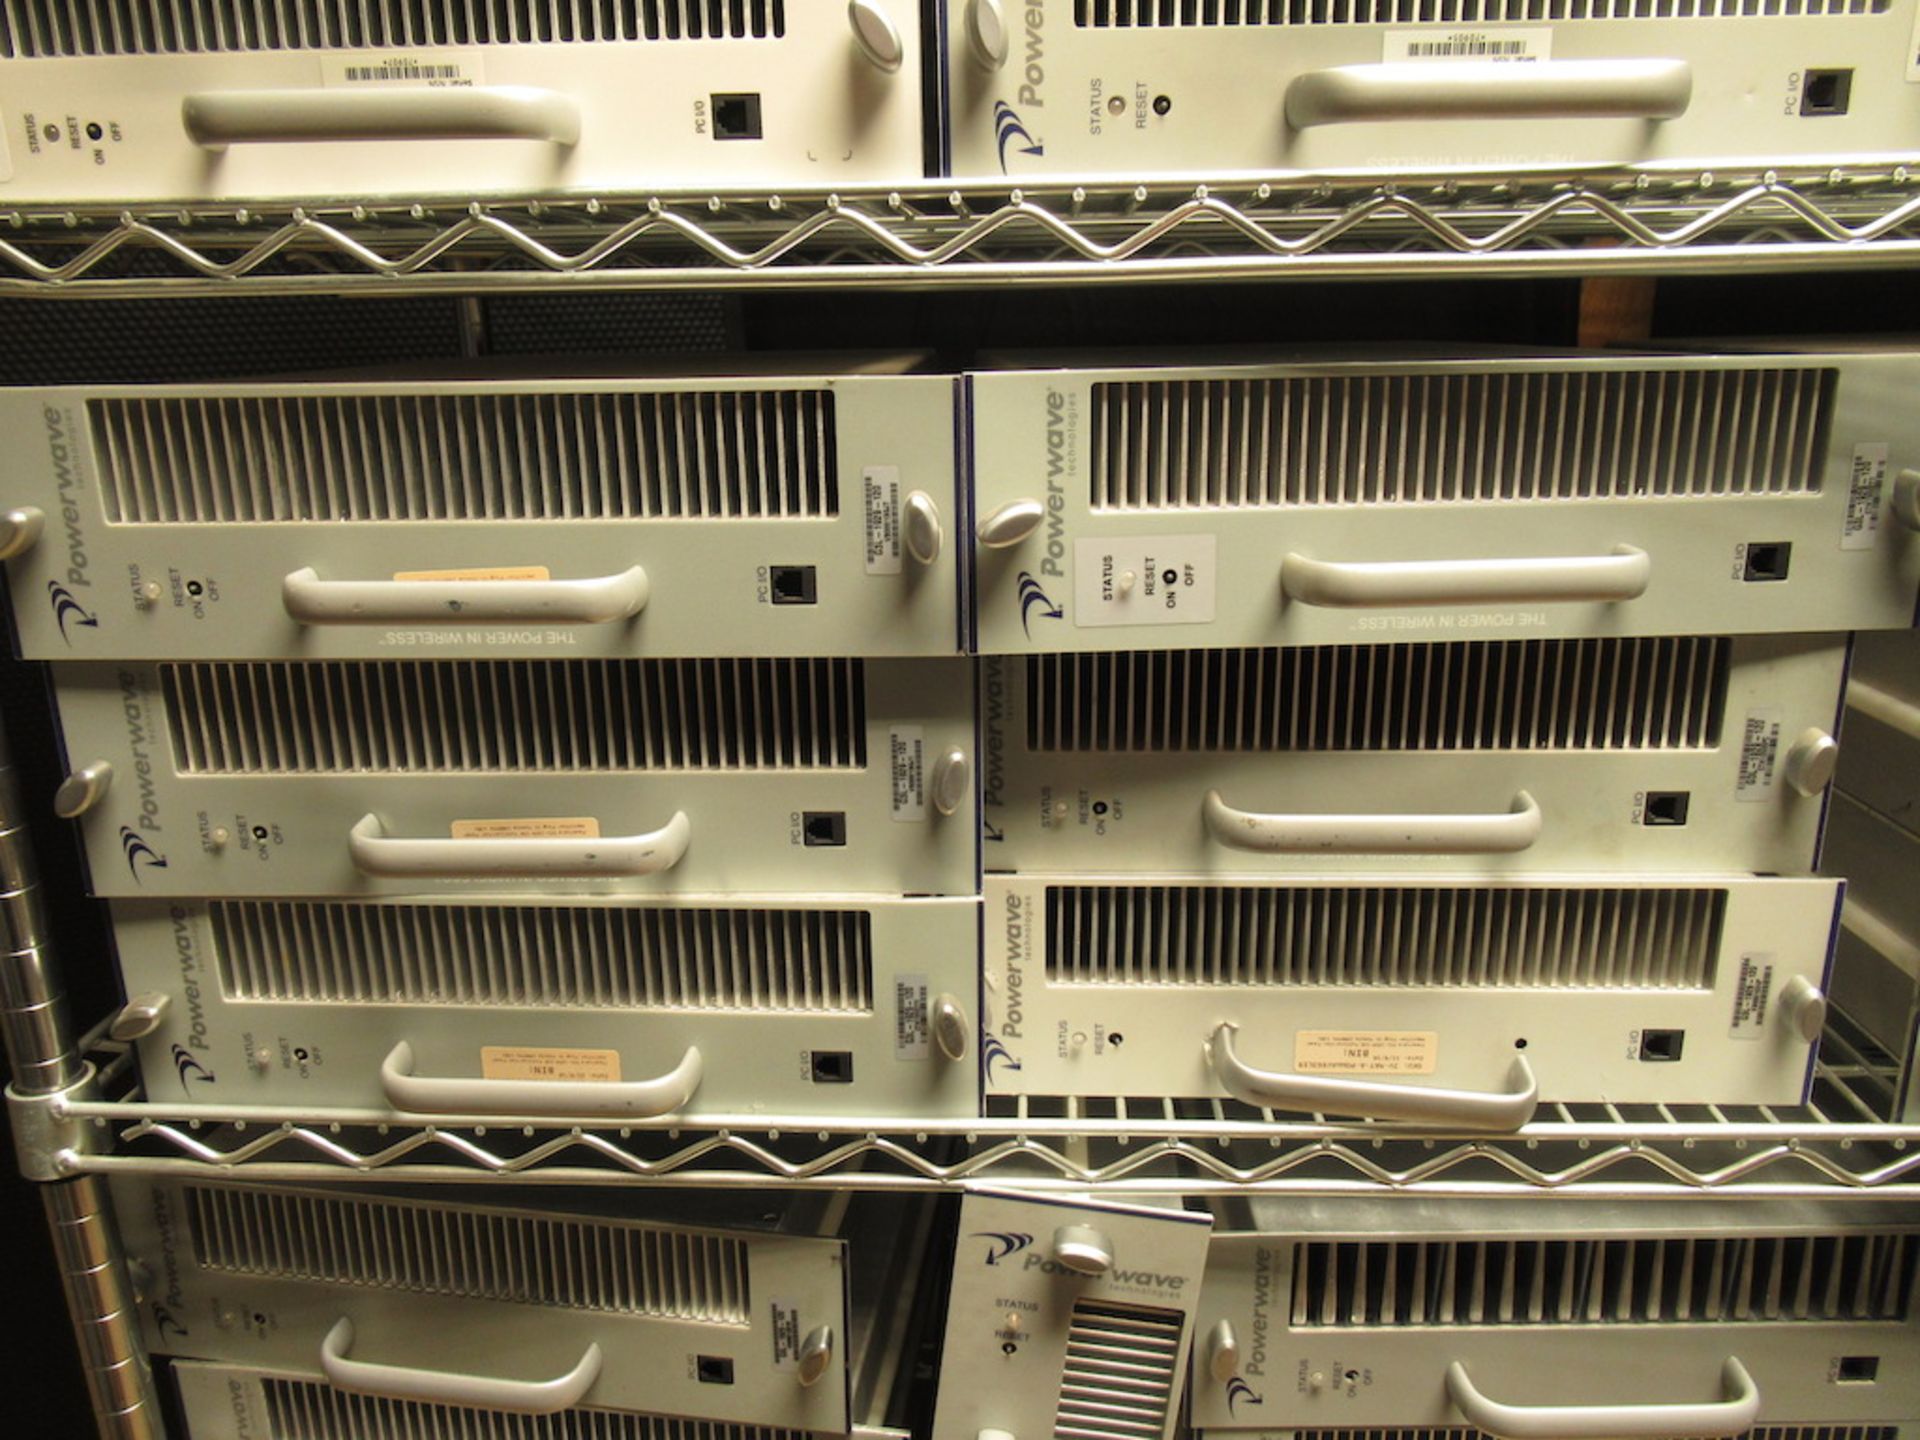 Lot to Include Entire Rack: (1) Powerwave 1 Command Combiner, (14) Powerwave G3L-1929-120, - Image 8 of 15